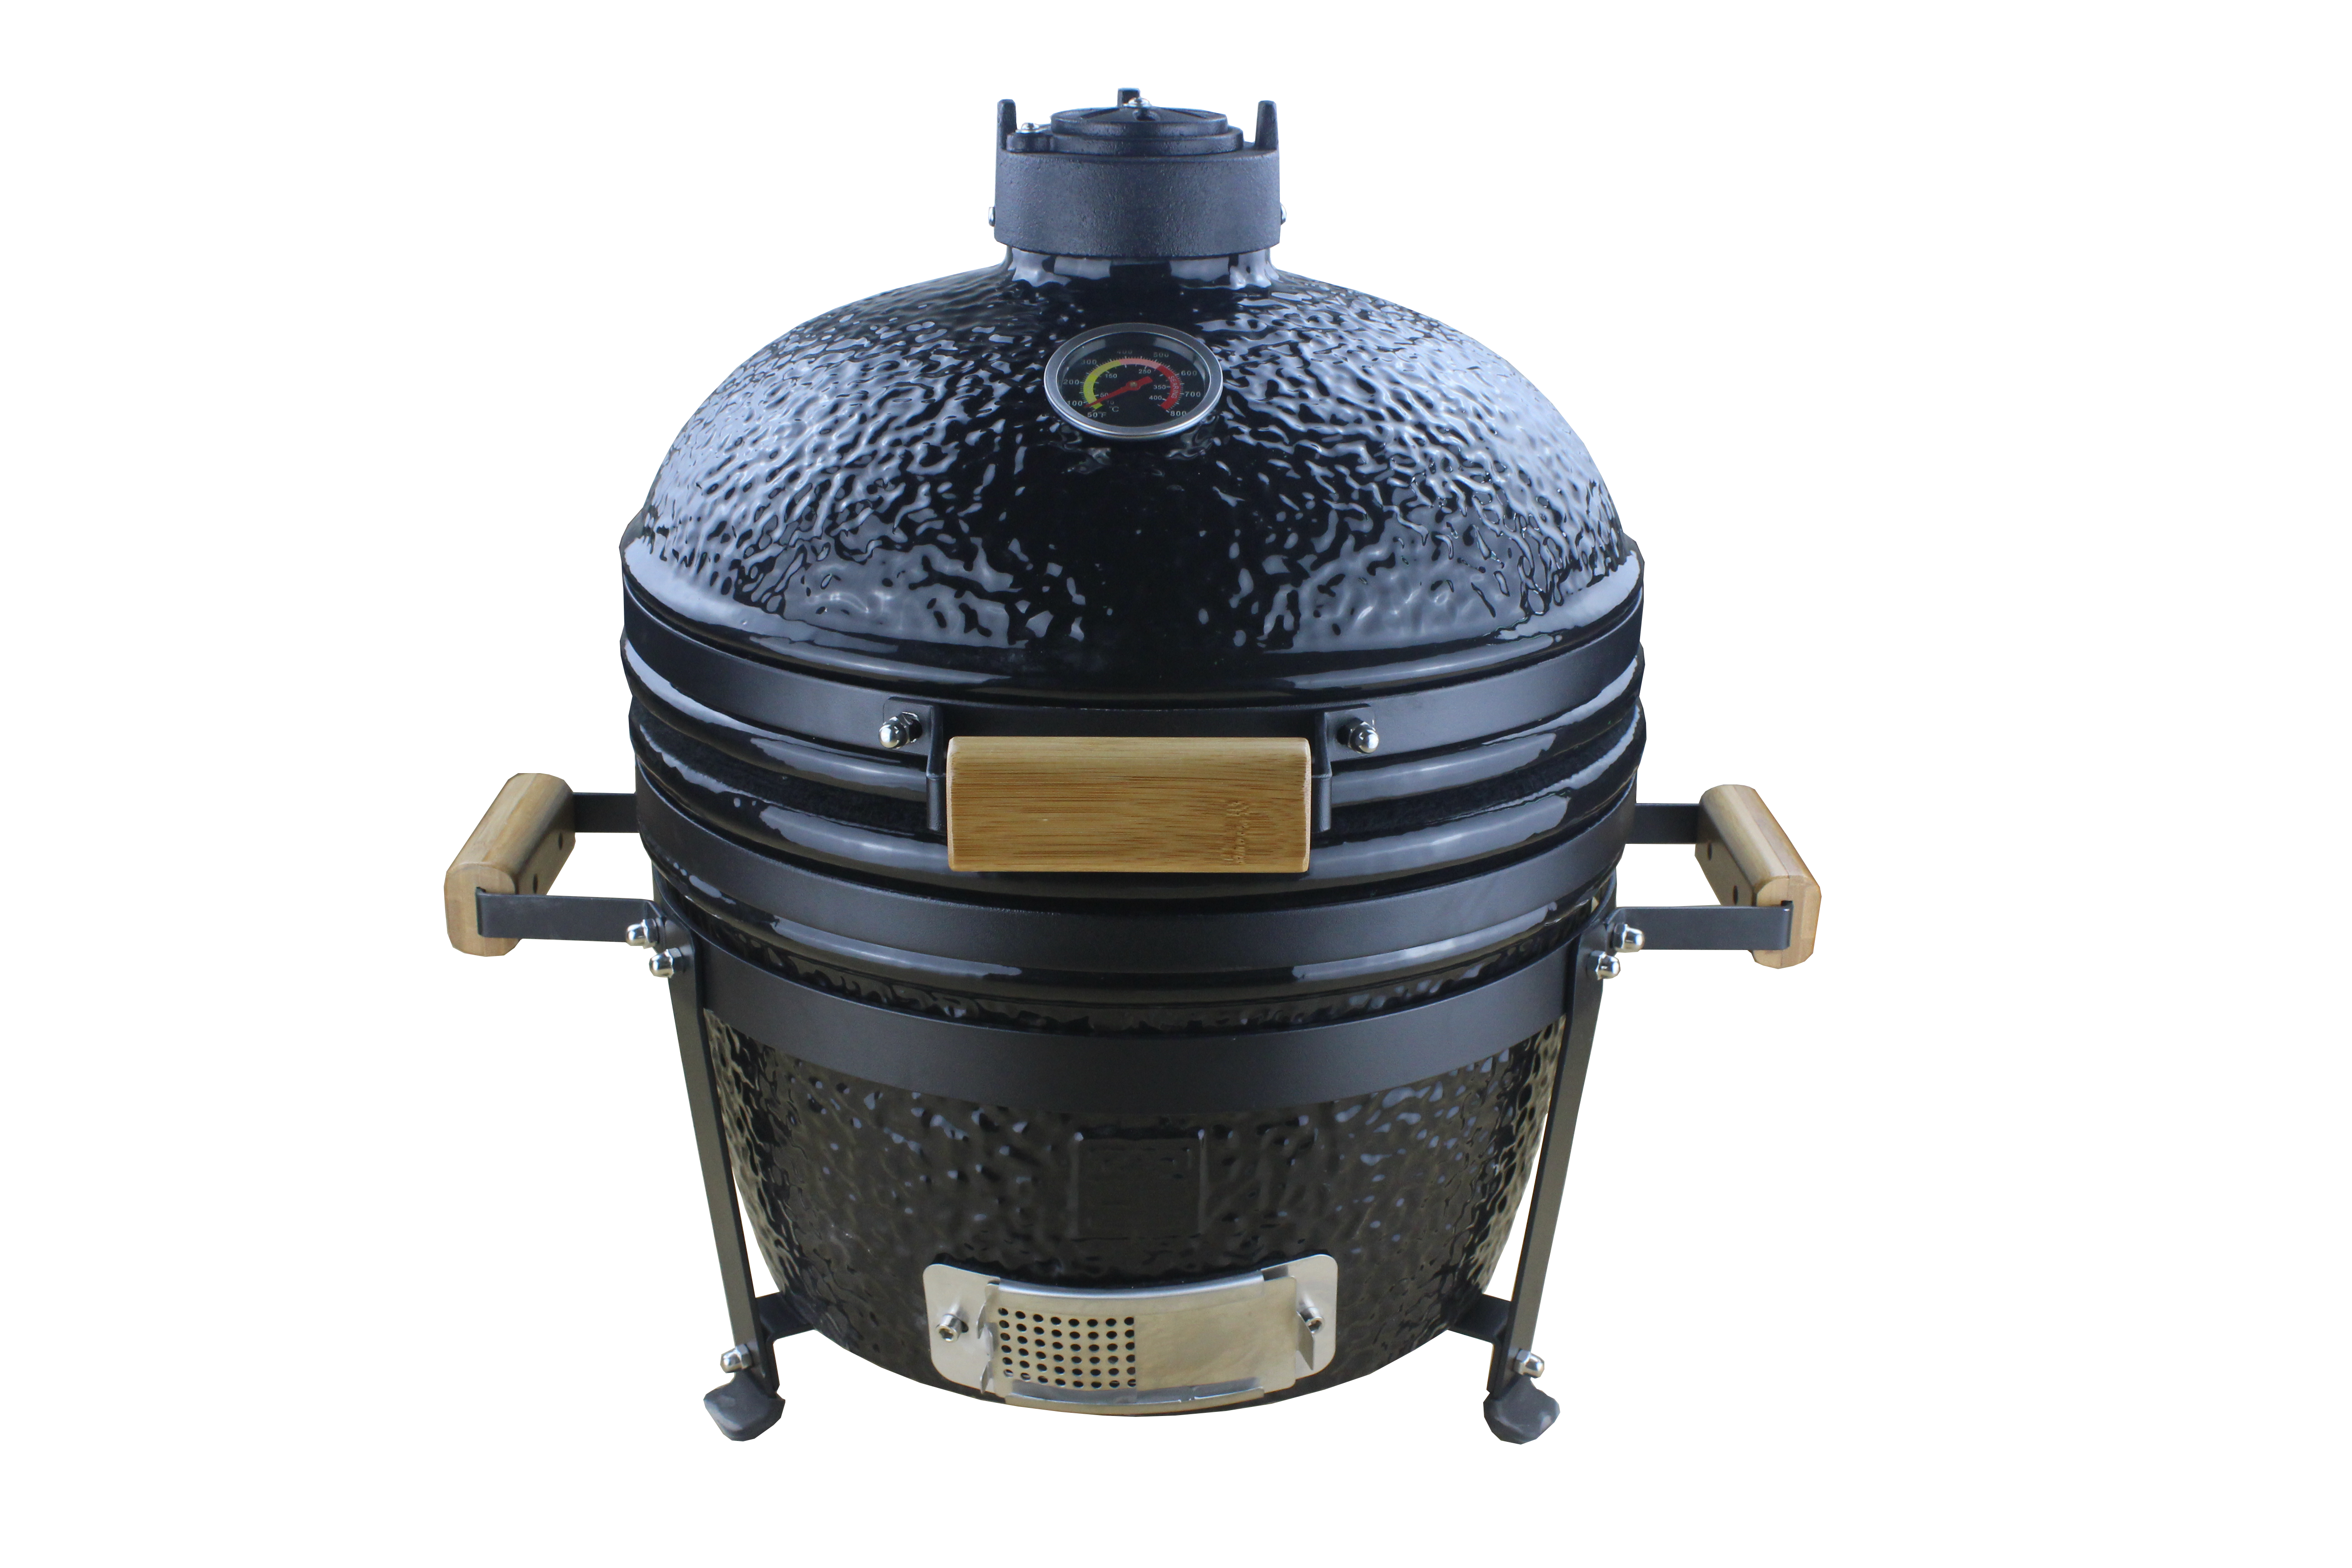 Auplex 16 Inch Outdoor Ceramic Grill Charcoal BBQ Kamado Featured Image